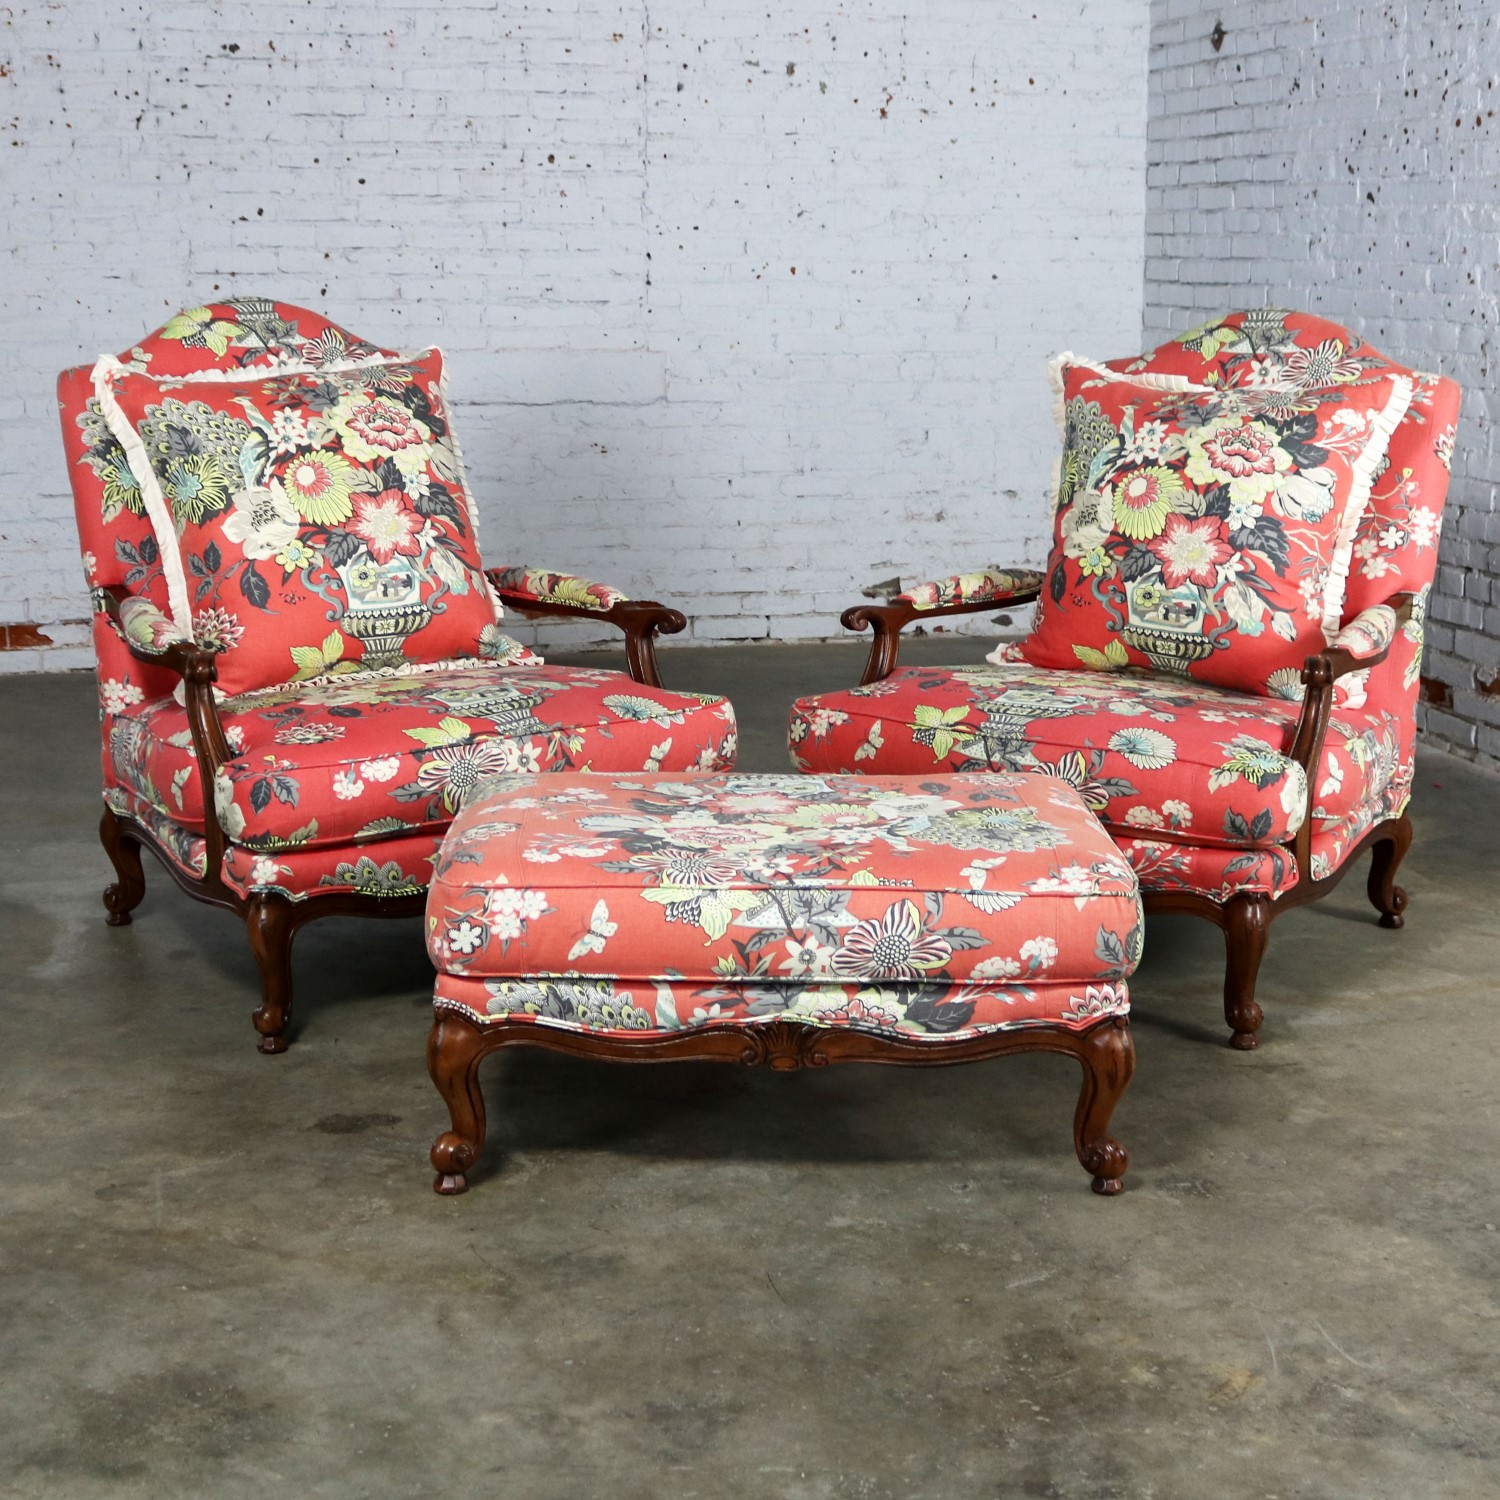 Overscale Pair Fauteuil Chairs with Ottoman Coral Cream and Gray